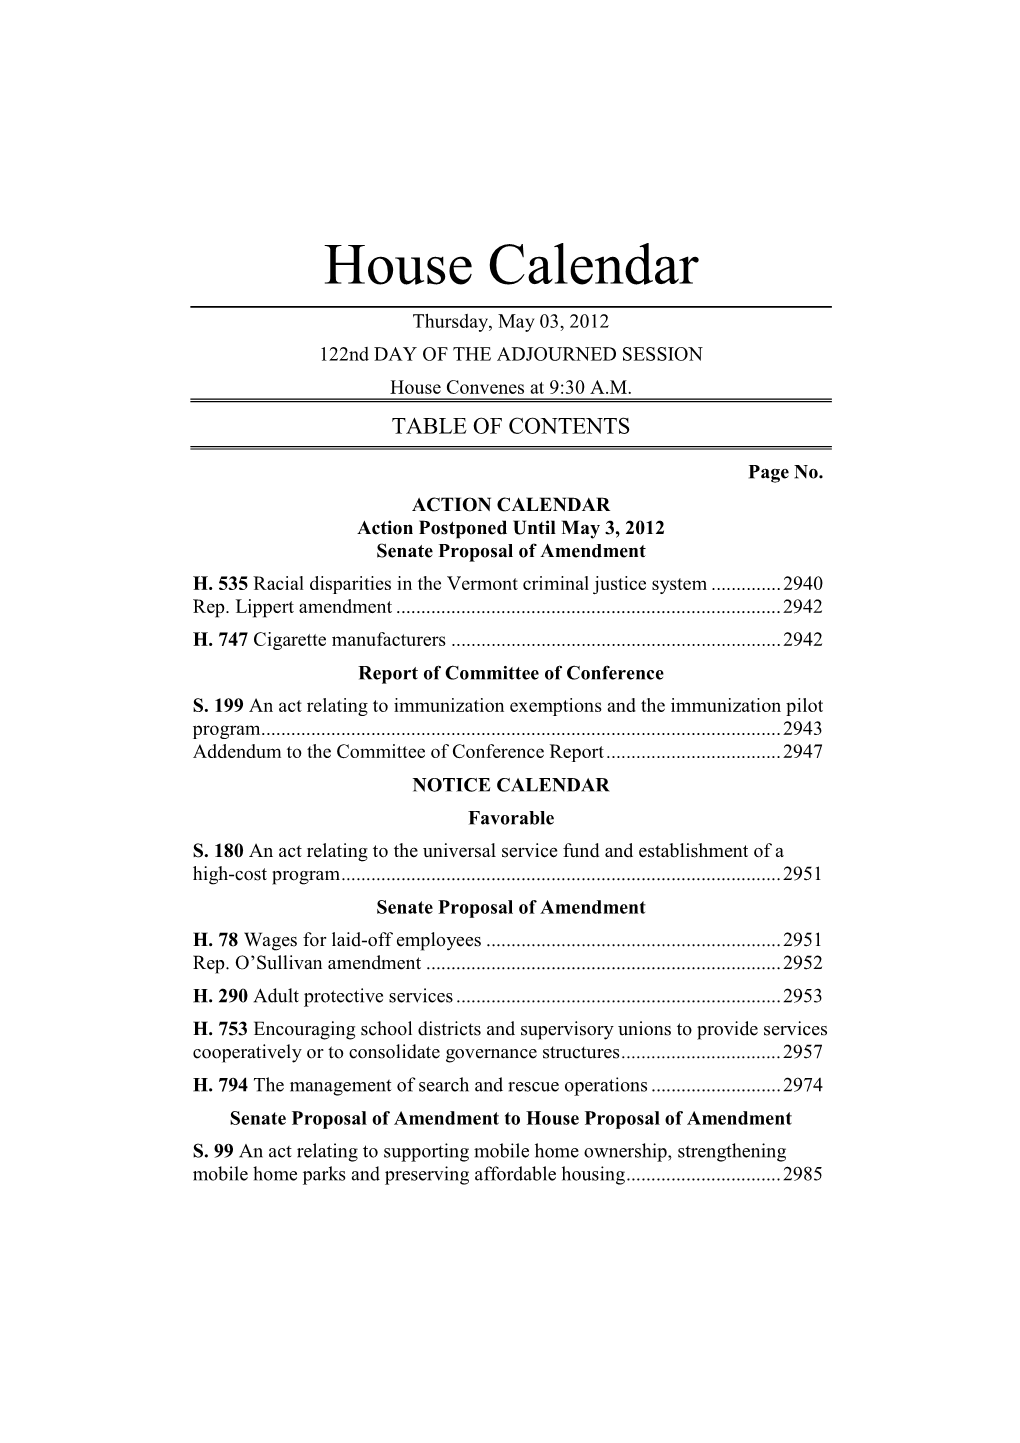 House Calendar Thursday, May 03, 2012 122Nd DAY of the ADJOURNED SESSION House Convenes at 9:30 A.M